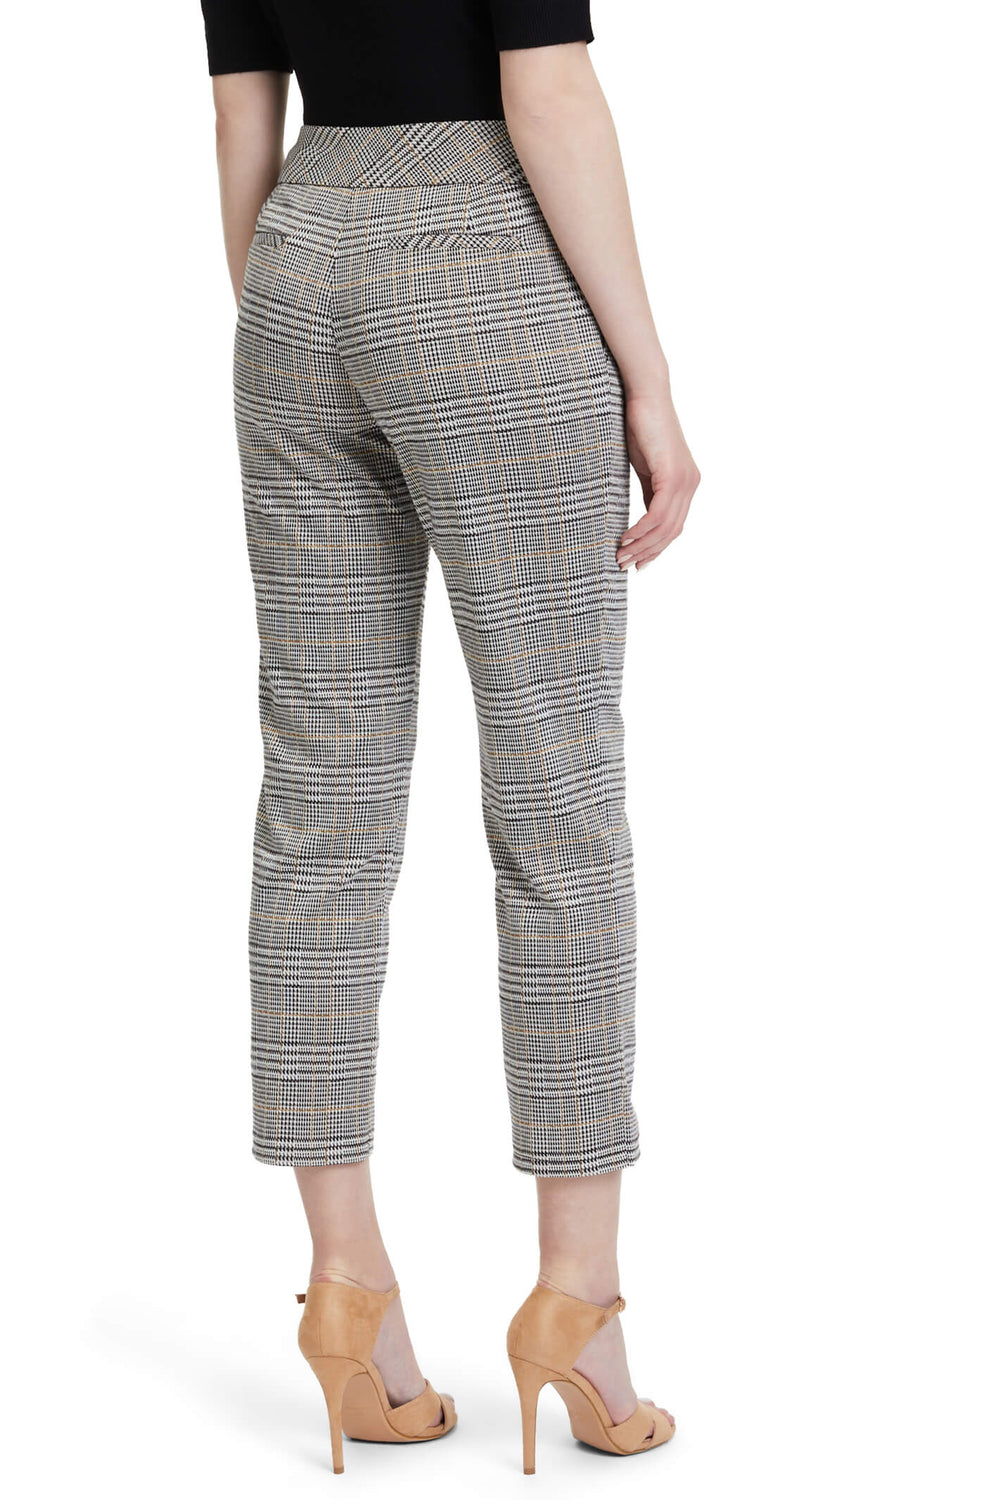 Betty Barclay 6811 2145 9875 Black Beige Checked Ankle Grazer Trousers - Dotique Chesterfield